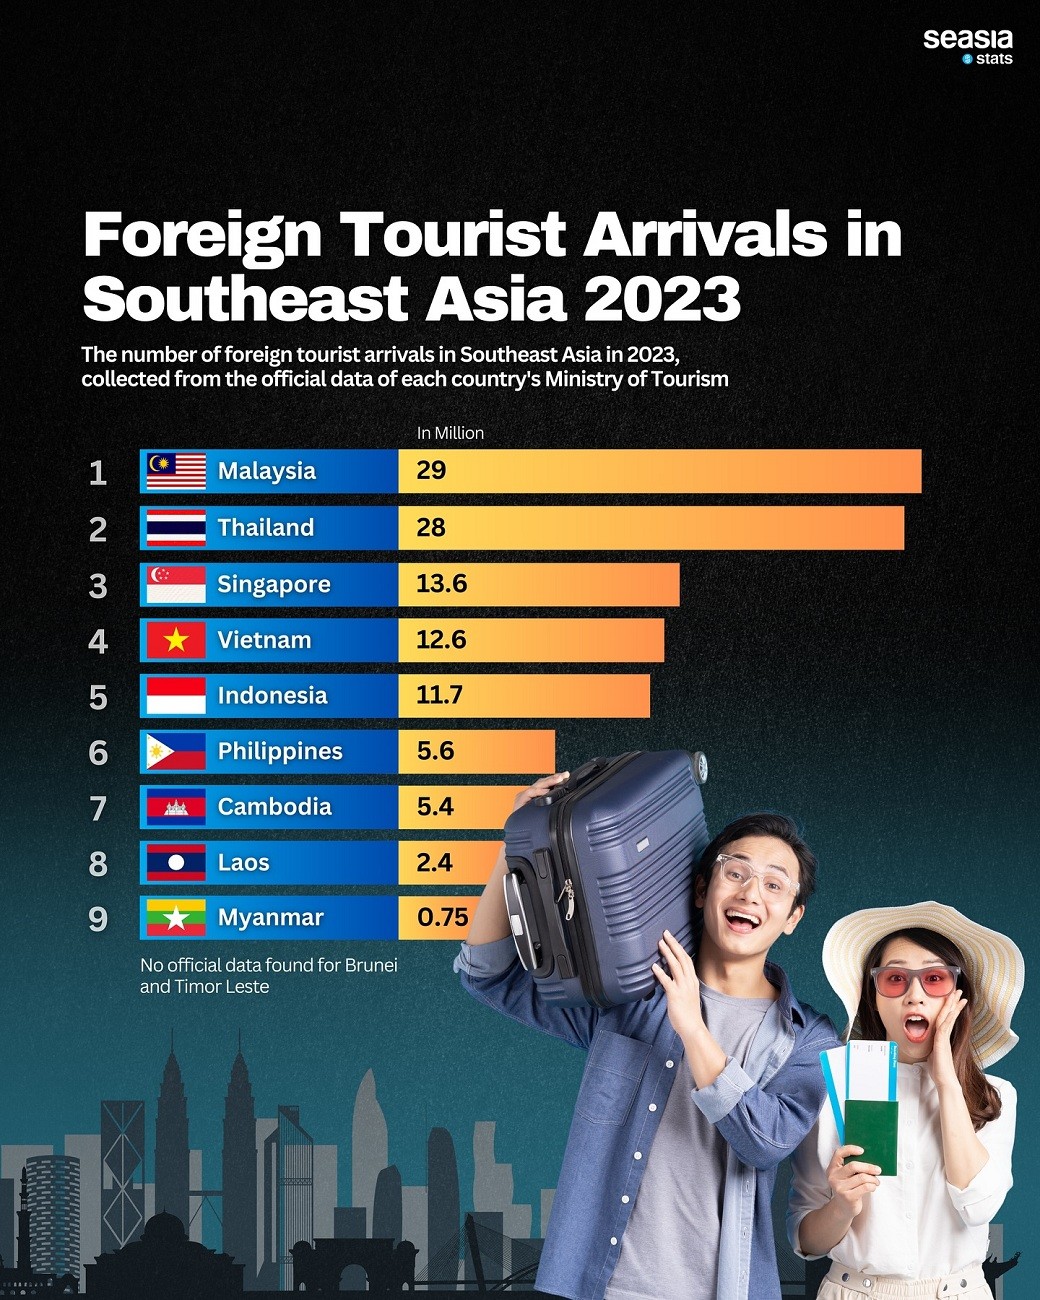 Vietnam Records 12.6 Million Foreign Visitors in 2023, 4th Highest in SEA